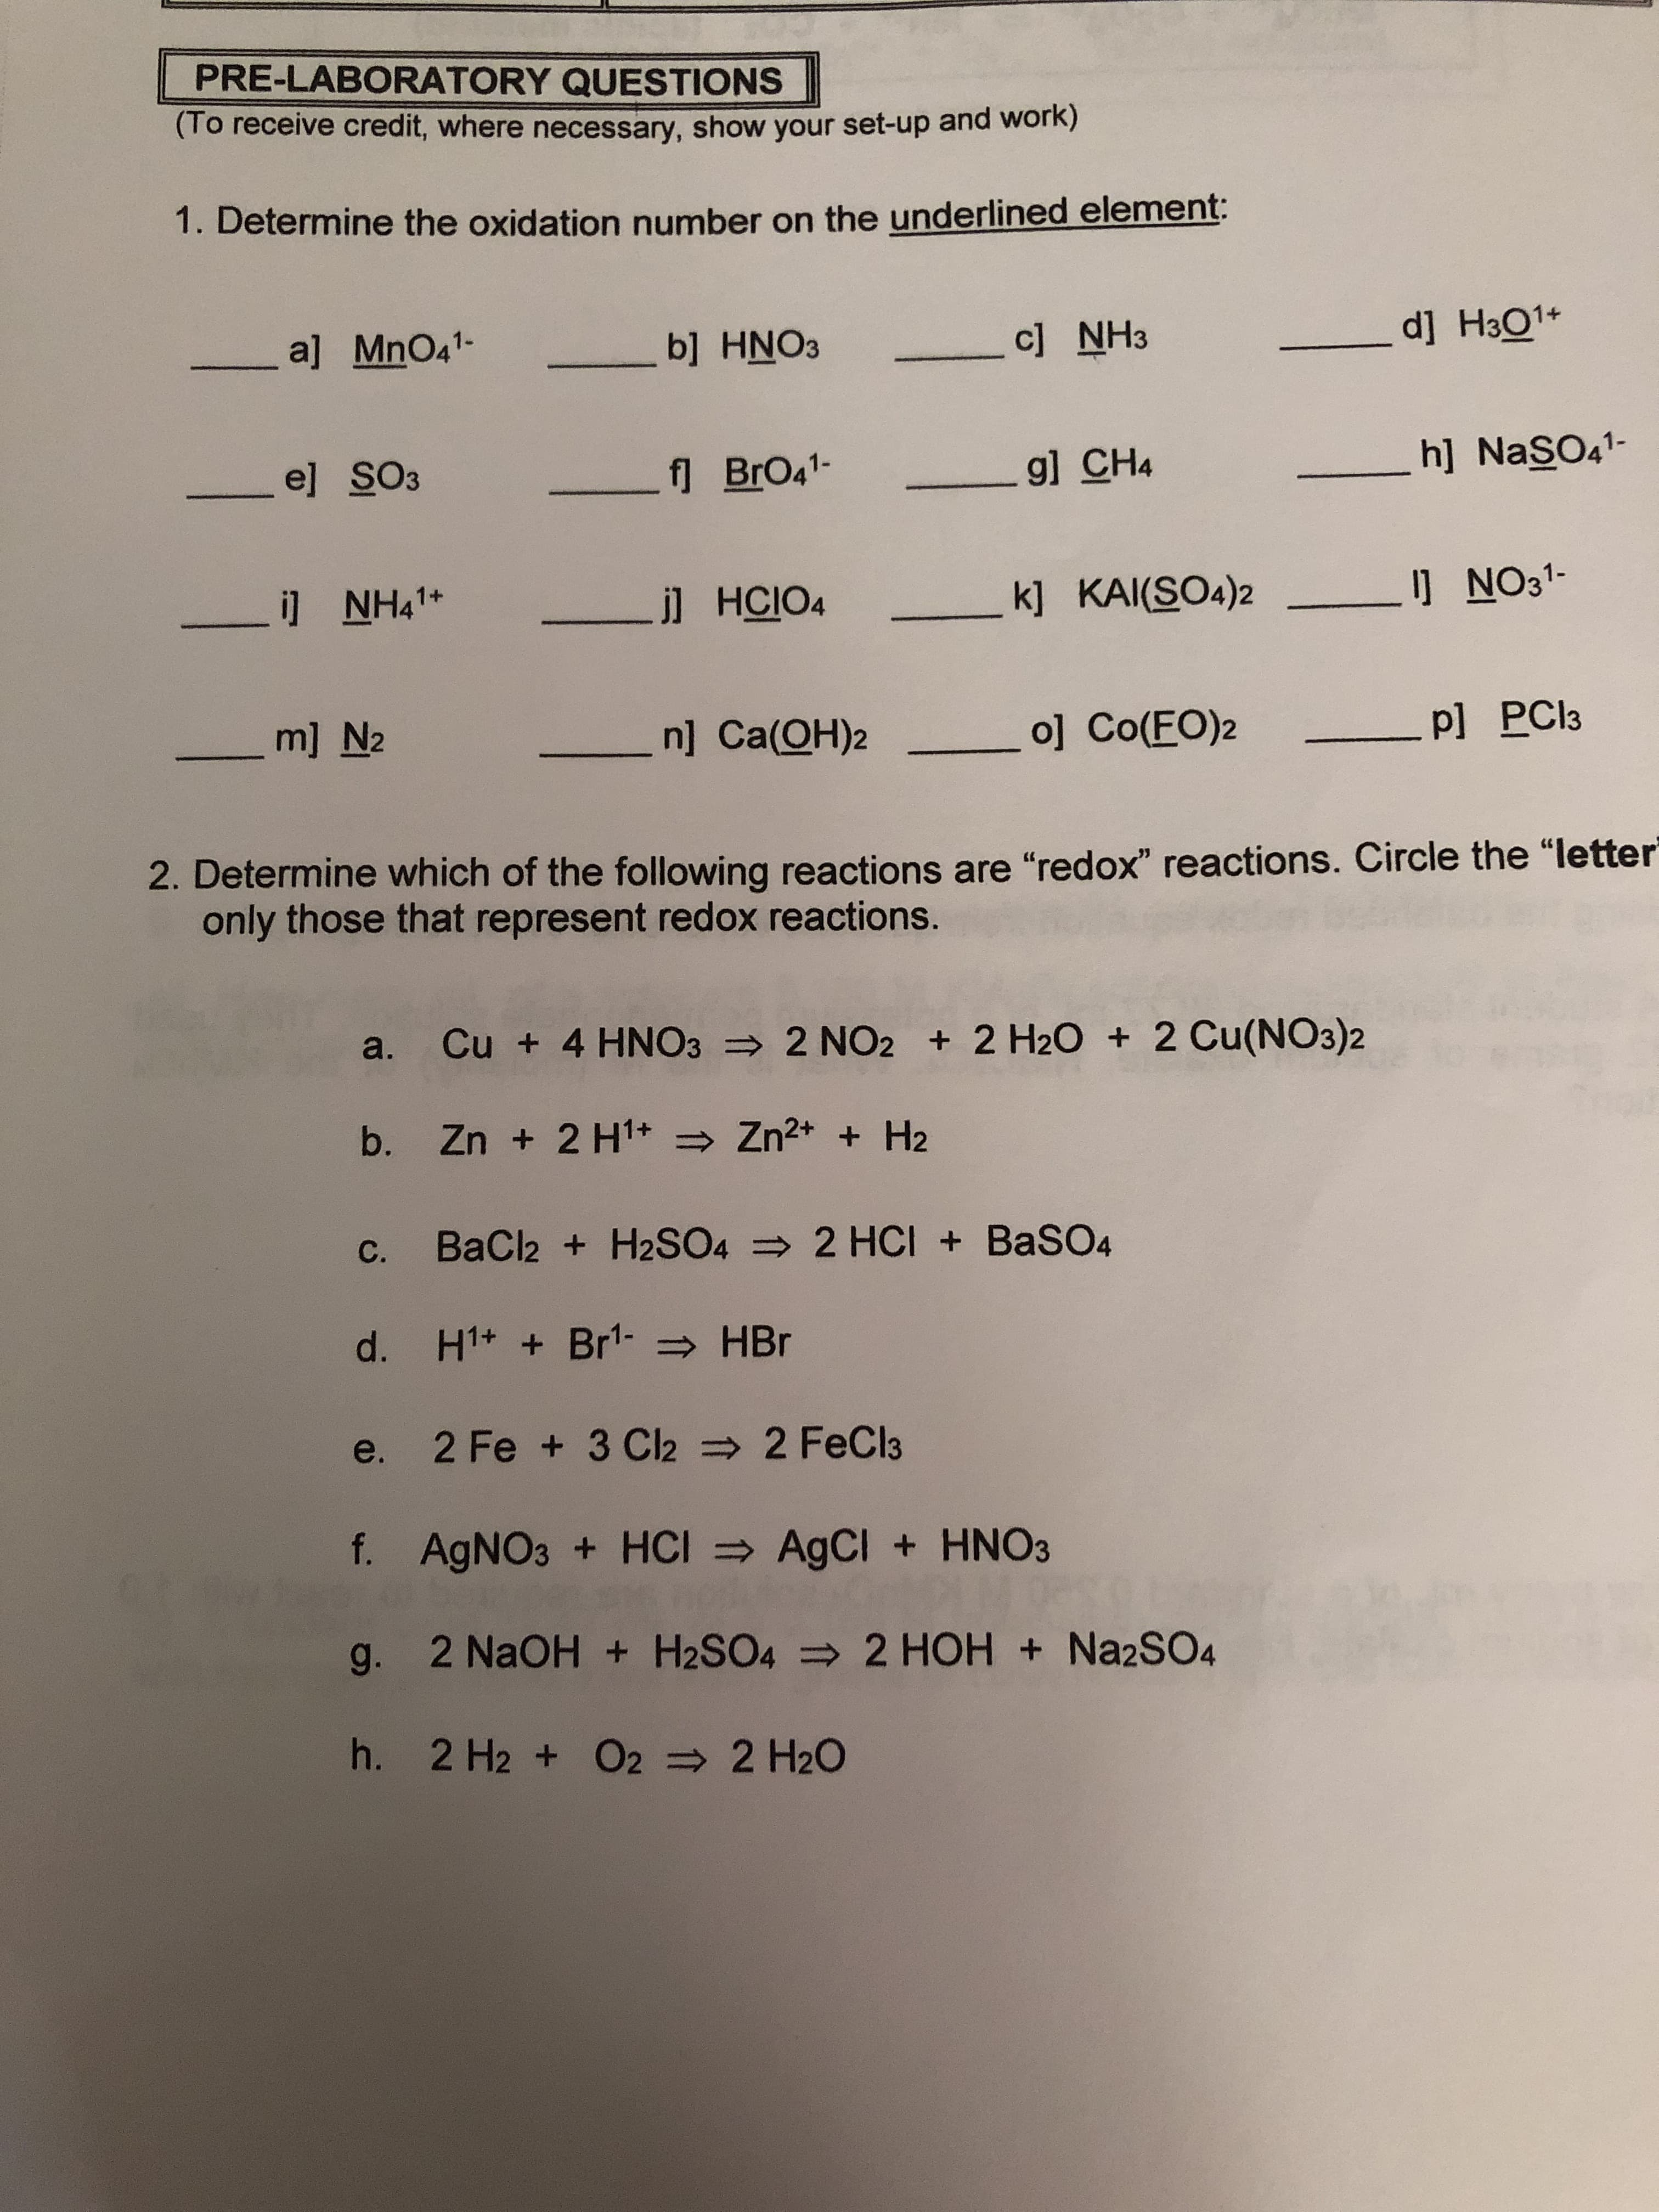 PRE-LABORATORY QUESTIONS
(To receive credit, where necessary, show your set-up and work)
1. Determine the oxidation number on the underlined element:
dj H301
a] MnO41-
c] NH3
b] HNO3
h] NaSO41-
el SO3
_g] CH4
f BrO41-
]NH41+
NO31-
k] KAI(SO4)2
.j] HCIO4
ml N2
.n] Ca(OH)2
o] Co(FO)2
_Pl PCI3
2. Determine which of the following reactions are "redox" reactions. Circle the "letter
only those that represent red ox reactions.
a. Cu + 4 HNO3 2 NO2 +2 H20 2 Cu(NO3)2
b. Zn + 2 H1
Zn2+ H2
c. BaCl2 + H2SO4 2 HCI +BaSO4
d. H1+ Br1- HBr
2 FeCl3
e. 2 Fe + 3 Cl2
f. AgNO3 + HCI AgCI +HNO3
g. 2 NaOH H2SO4 2 HOH + Na2SO4
h. 2 H2 O2 2 H20
